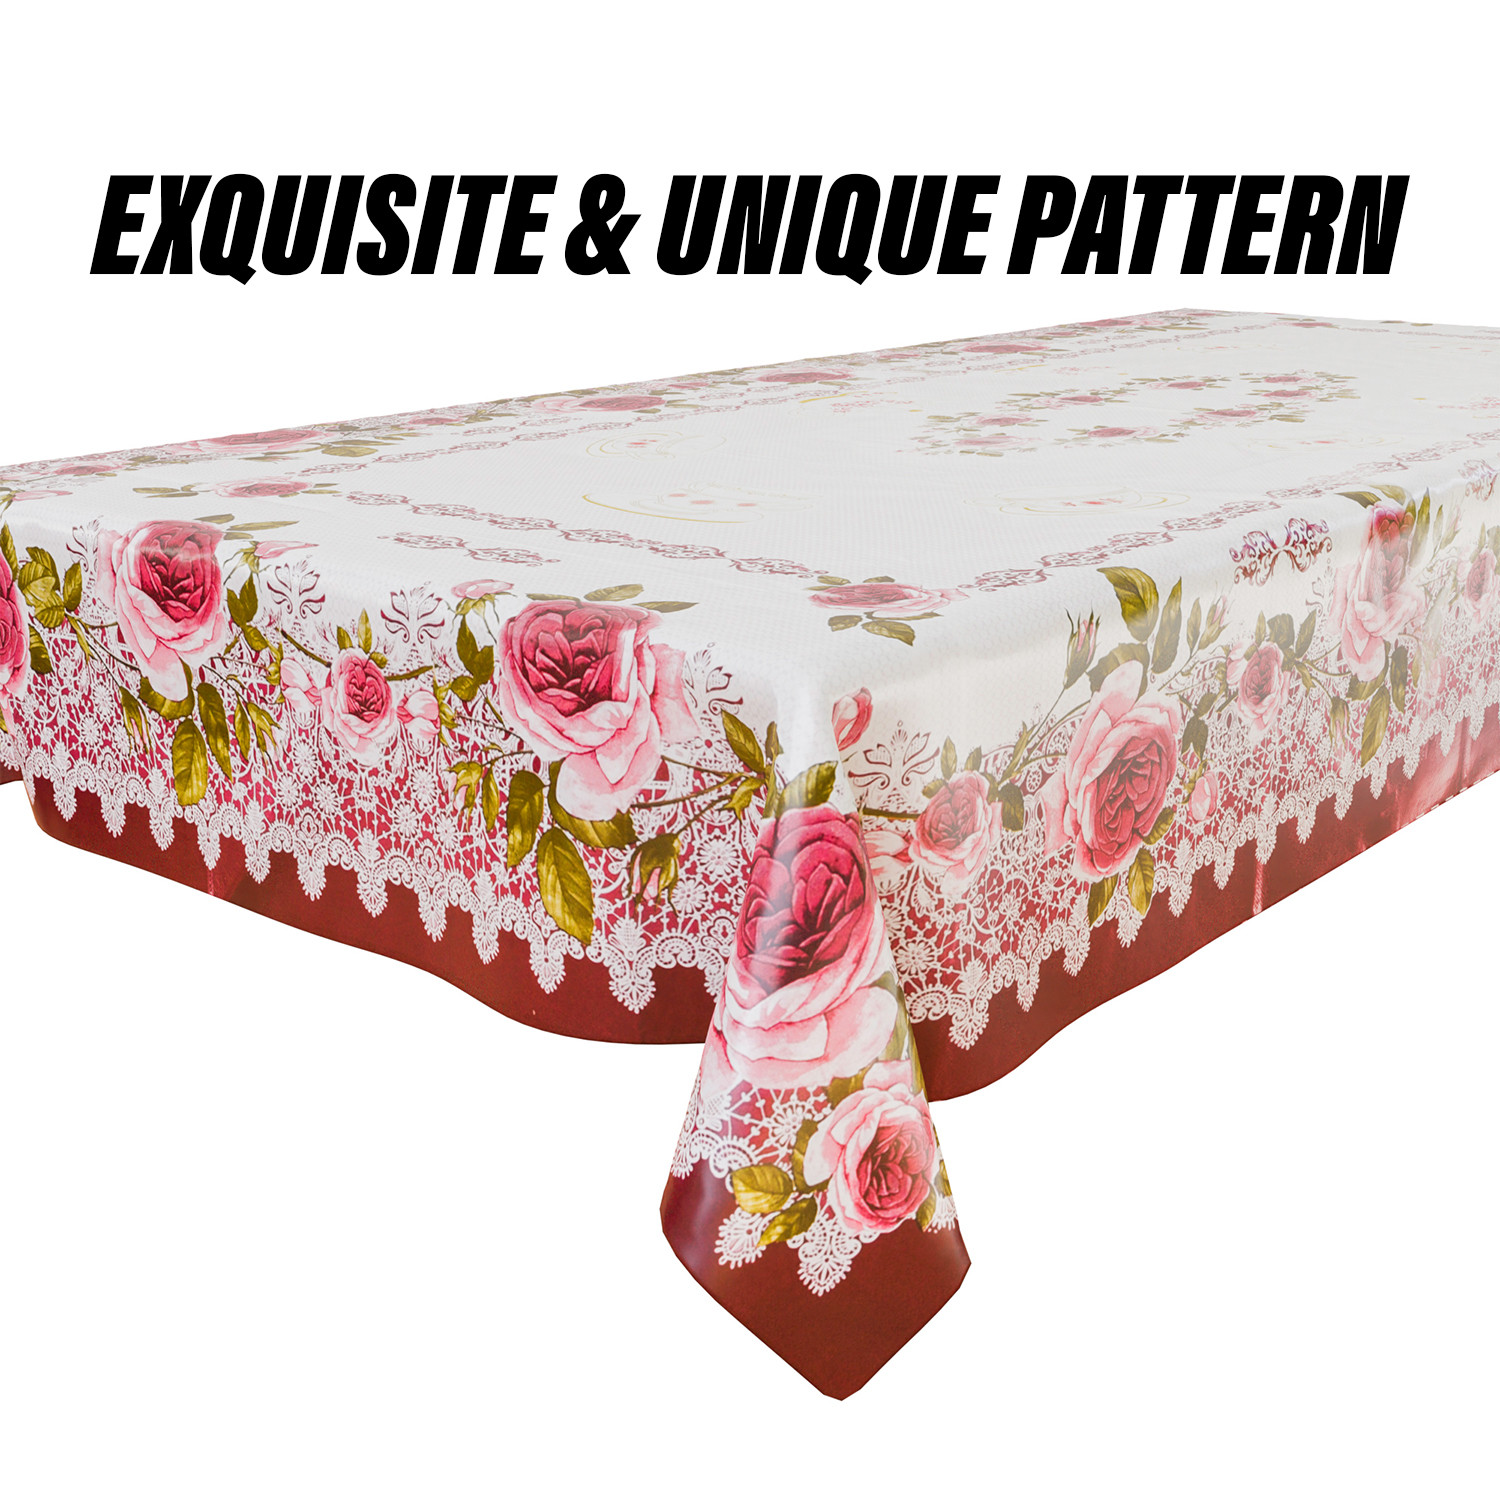 Kuber Industries Center Table Cover | PVC Cup Design with Floral Border Table Cover | Luxurious Table Protector Cover Without Lace for Home | 40x60 Inch | Pink